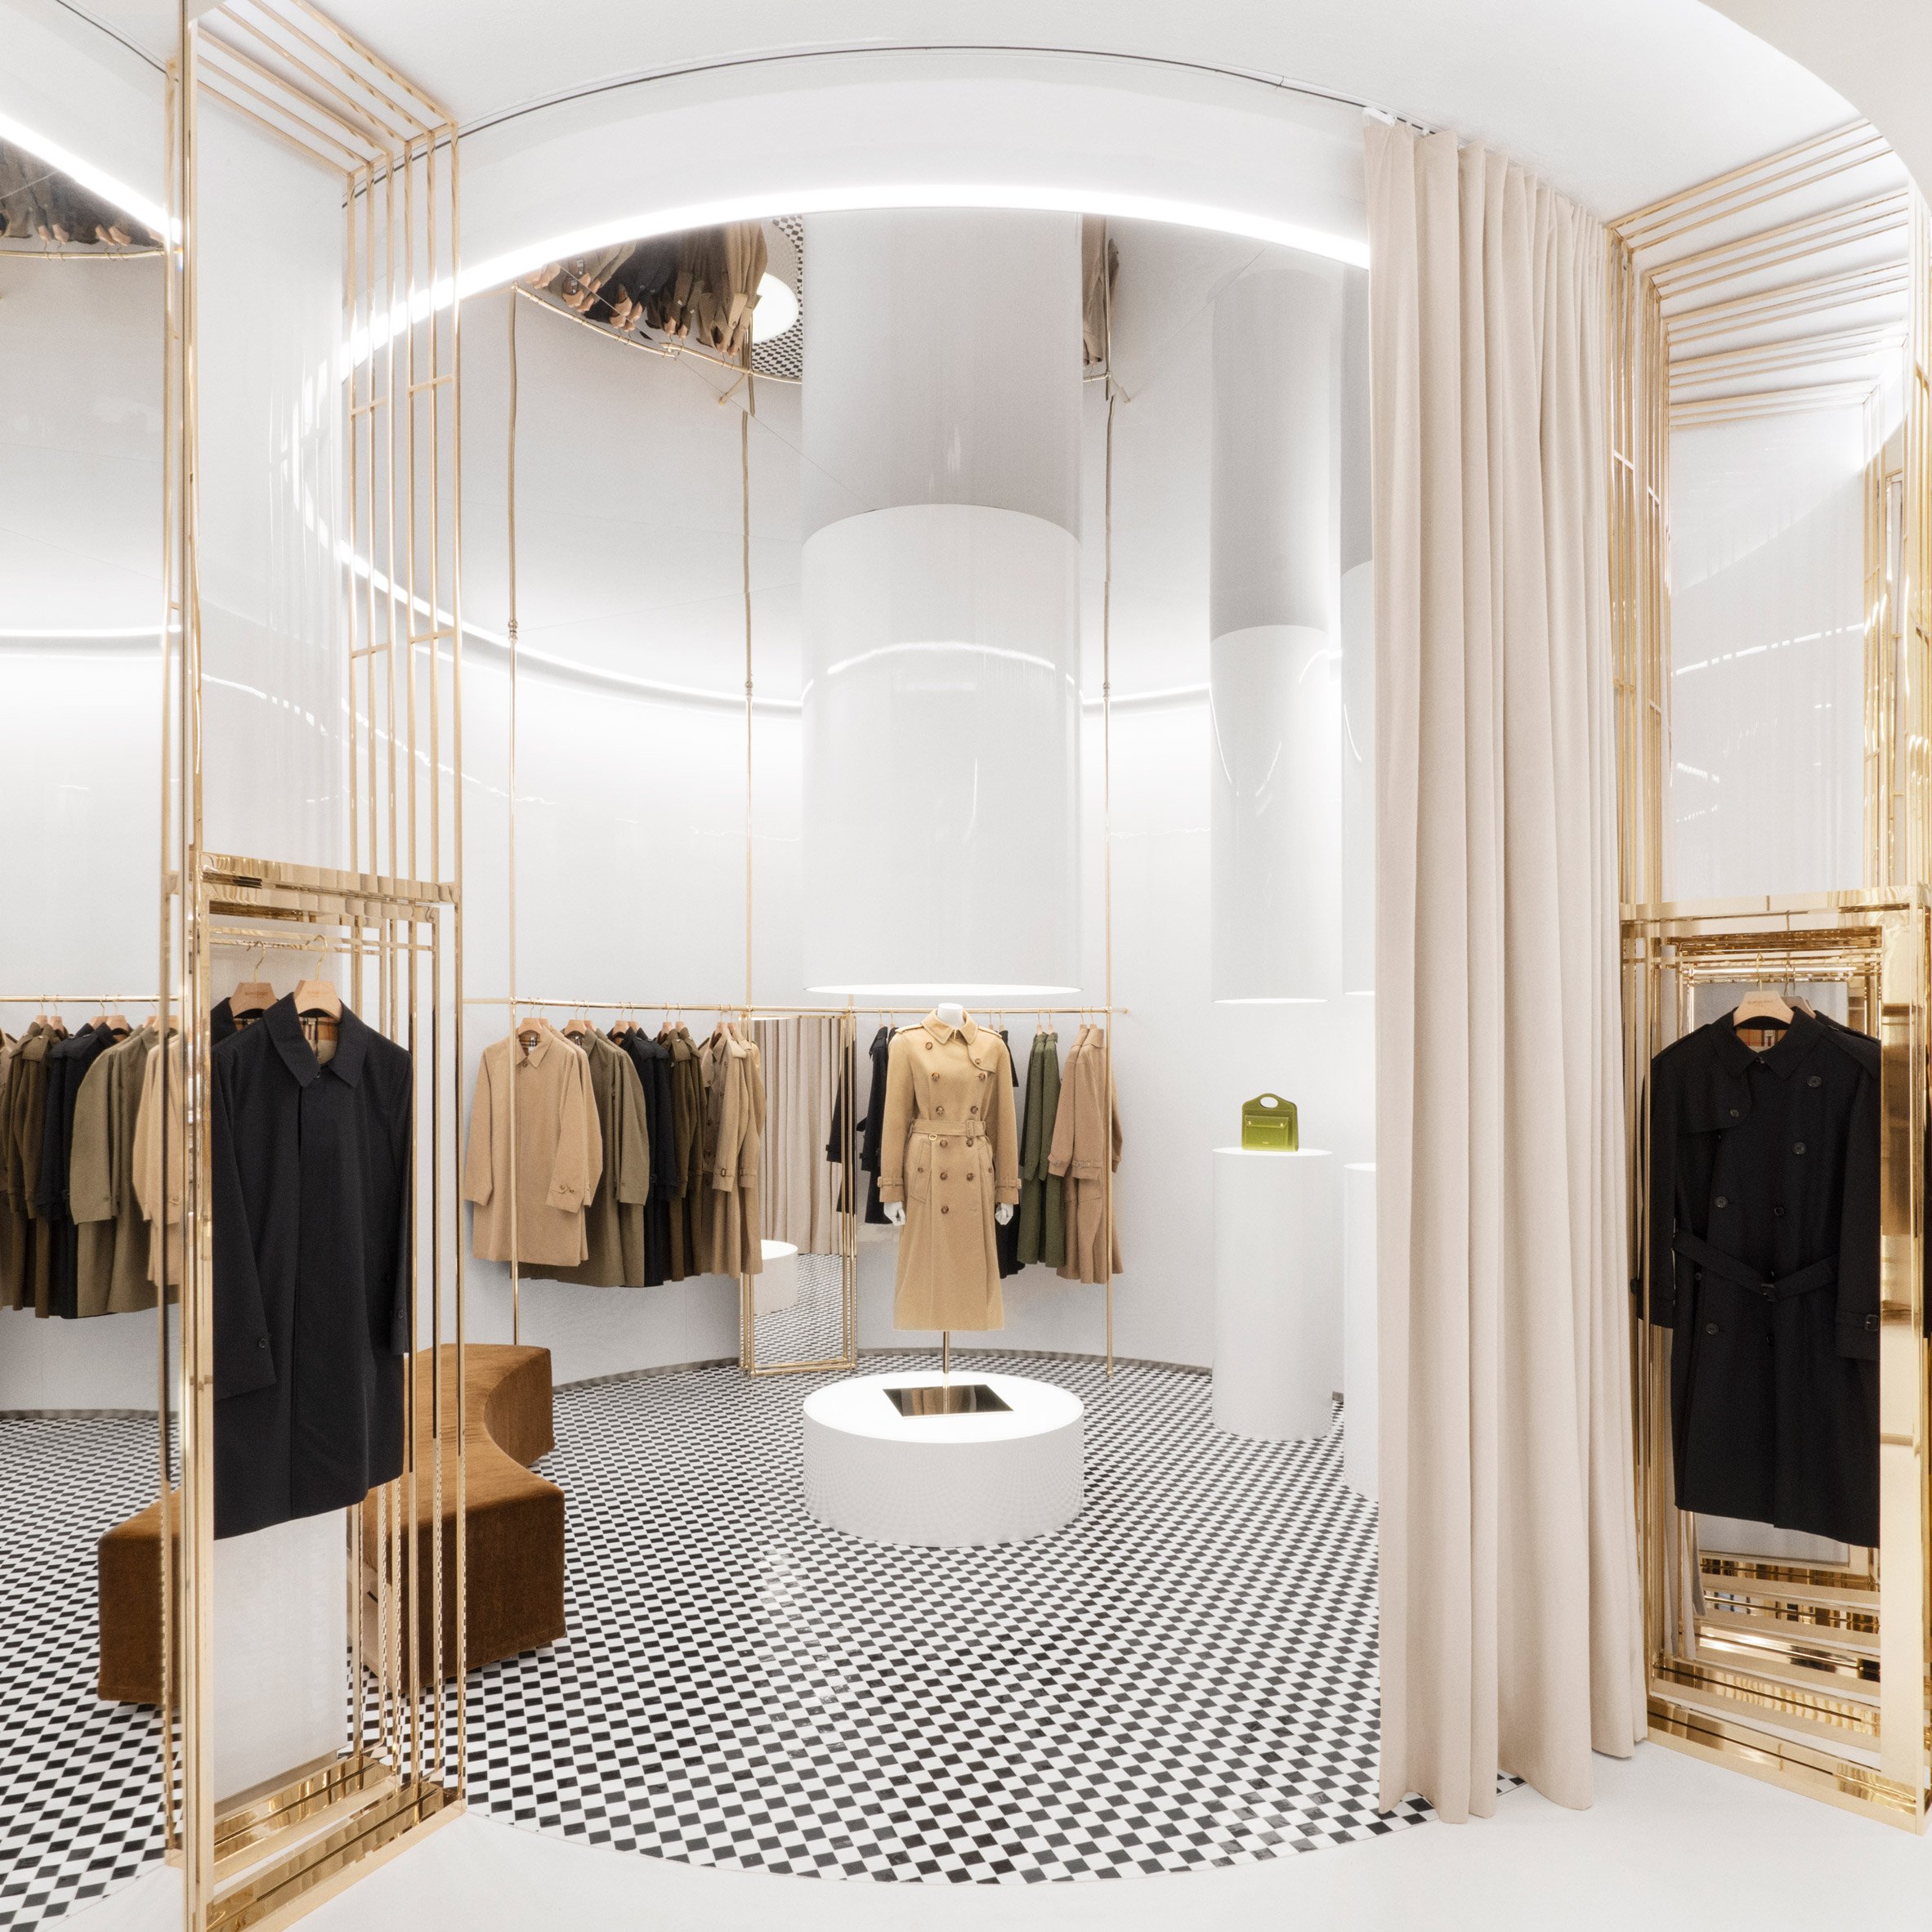 Vincenzo De Cotiis pays homage to Burberry check in London 